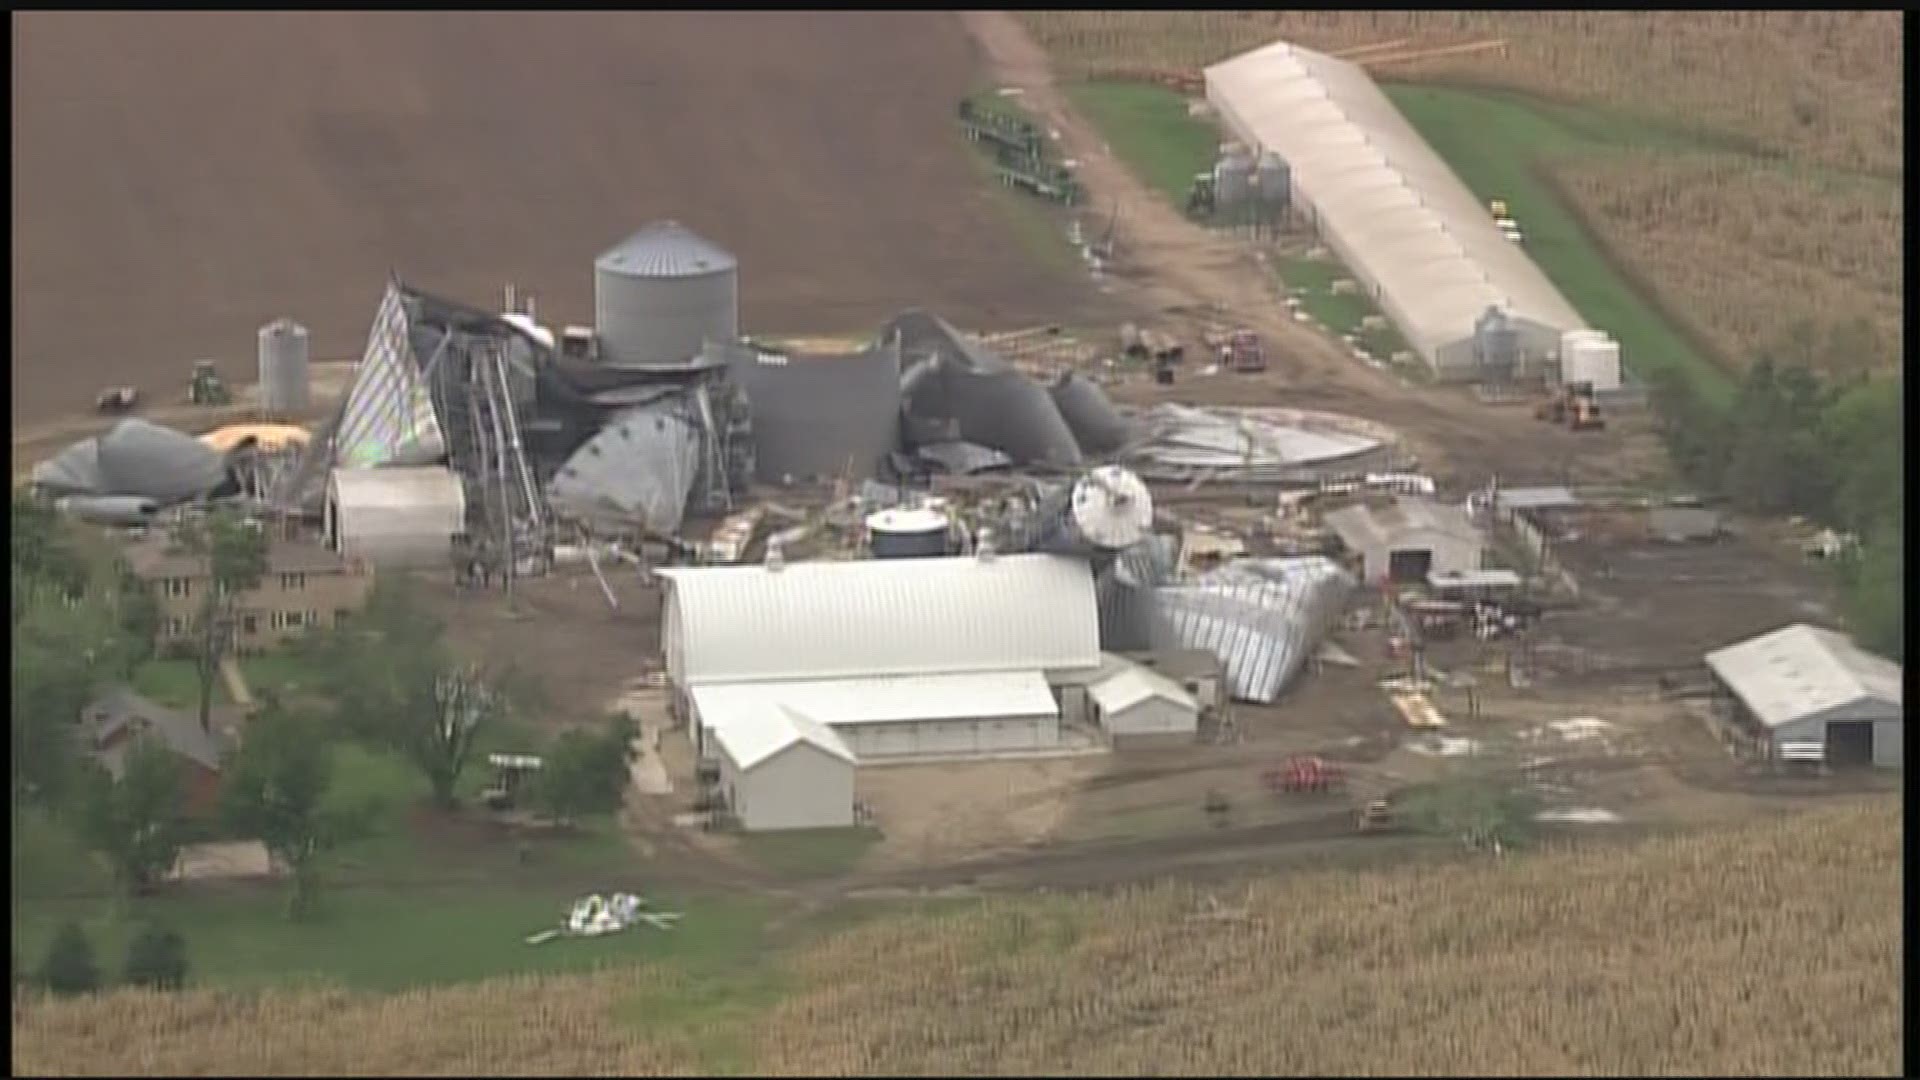 It is clear from SKY 11 that the storms that swept across southeastern Minnesota Thursday night were strong and indiscriminate.